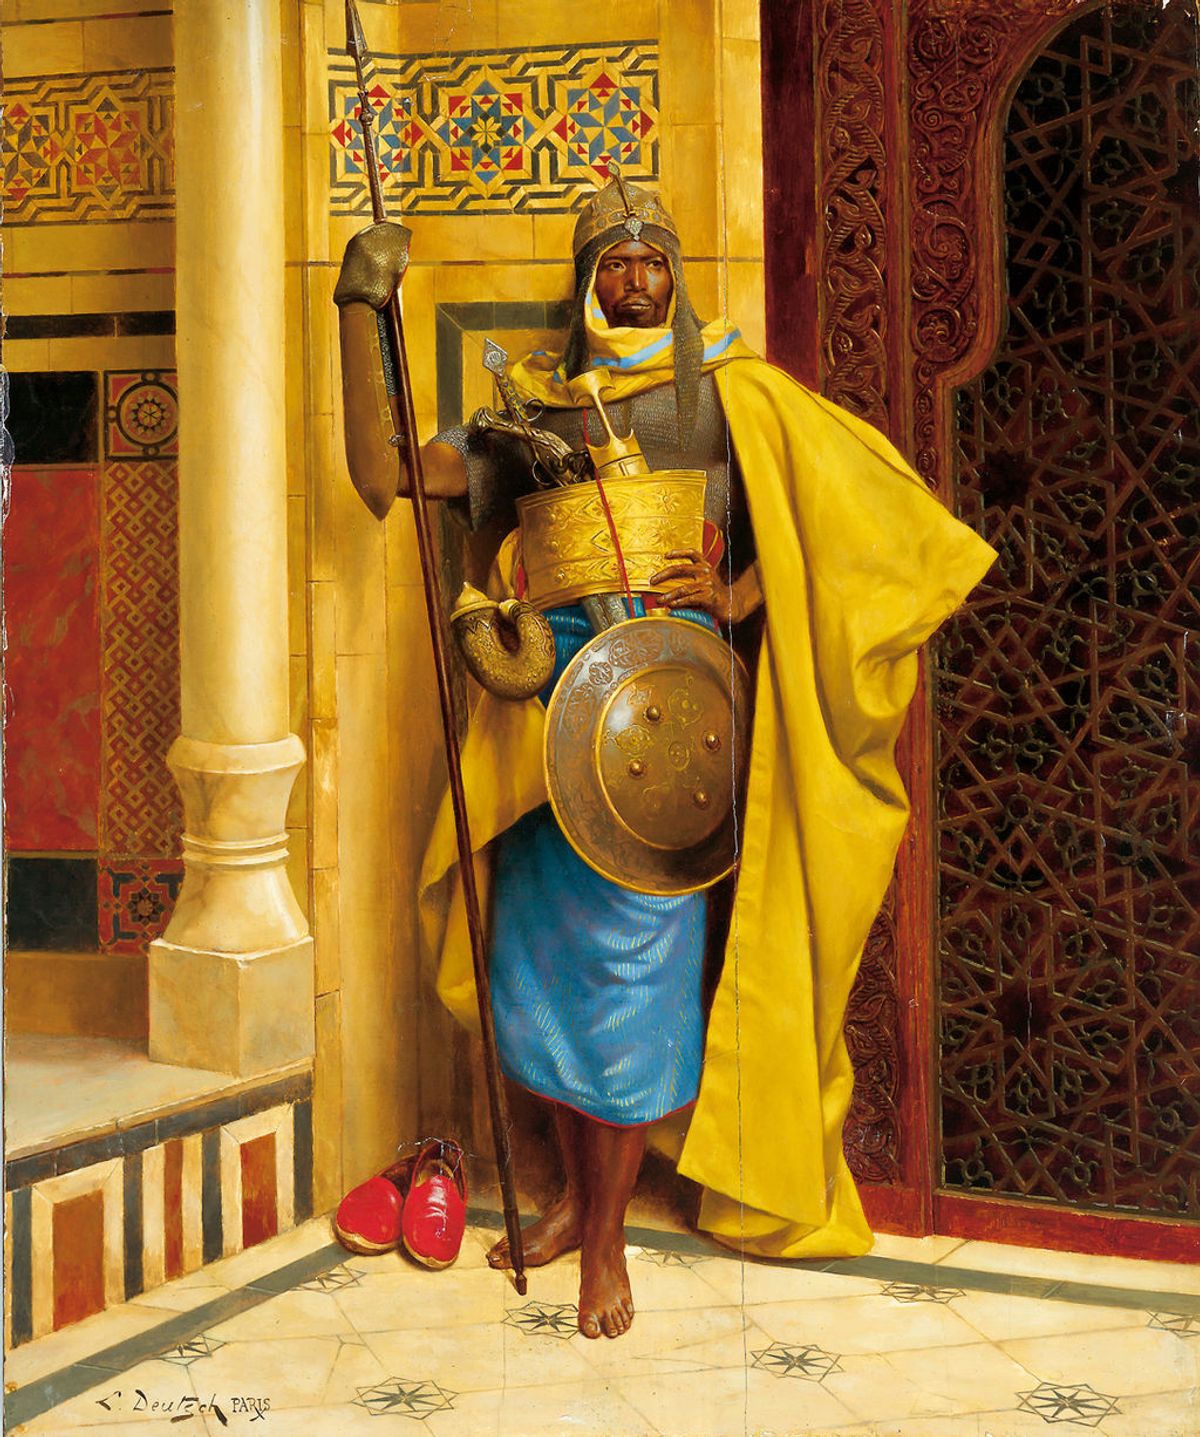 Ludwig Deutsch’s Palace Guard set a new auction record for an Orientalist picture when it sold for $2.6 m at Christie’s New York in November 